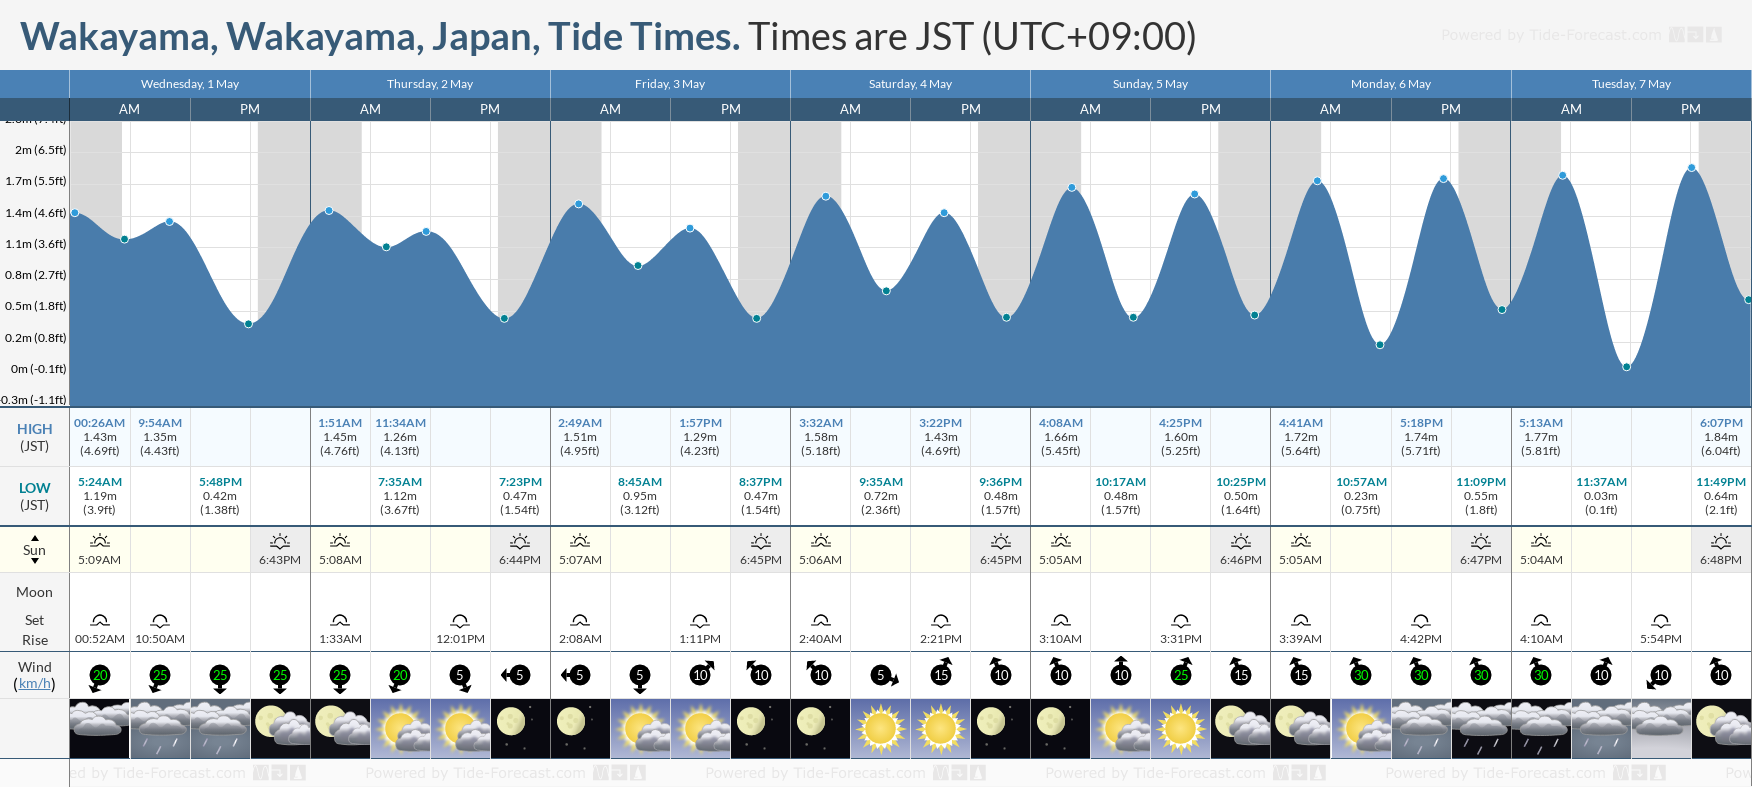 Wakayama, Wakayama, Japan Tide Chart including high and low tide times for the next 7 days